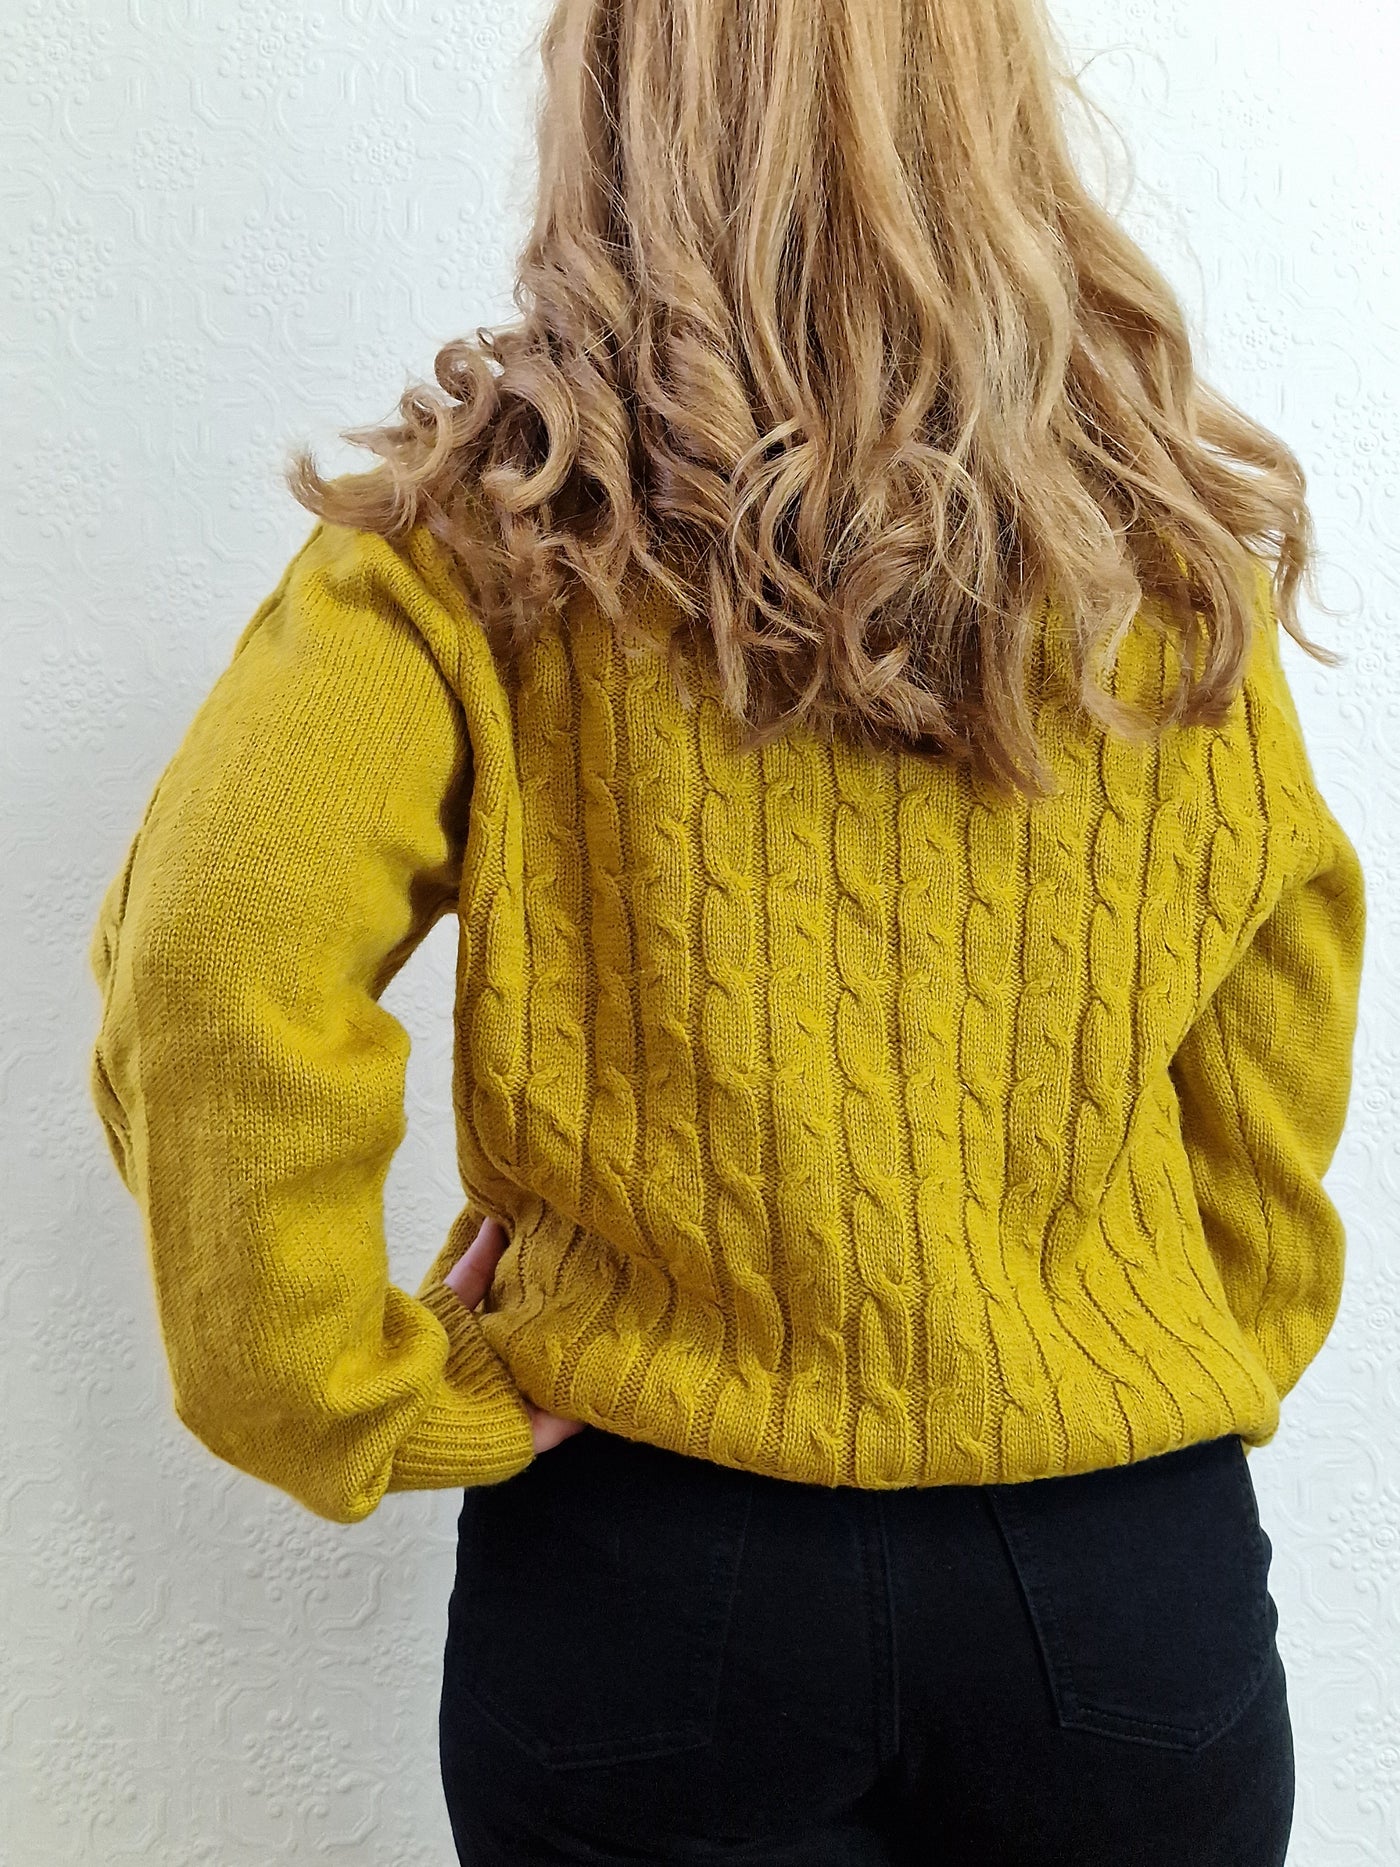 Vintage 90s Mustard Aran Style Cable Knit Jumper with Crew Neck - M/L